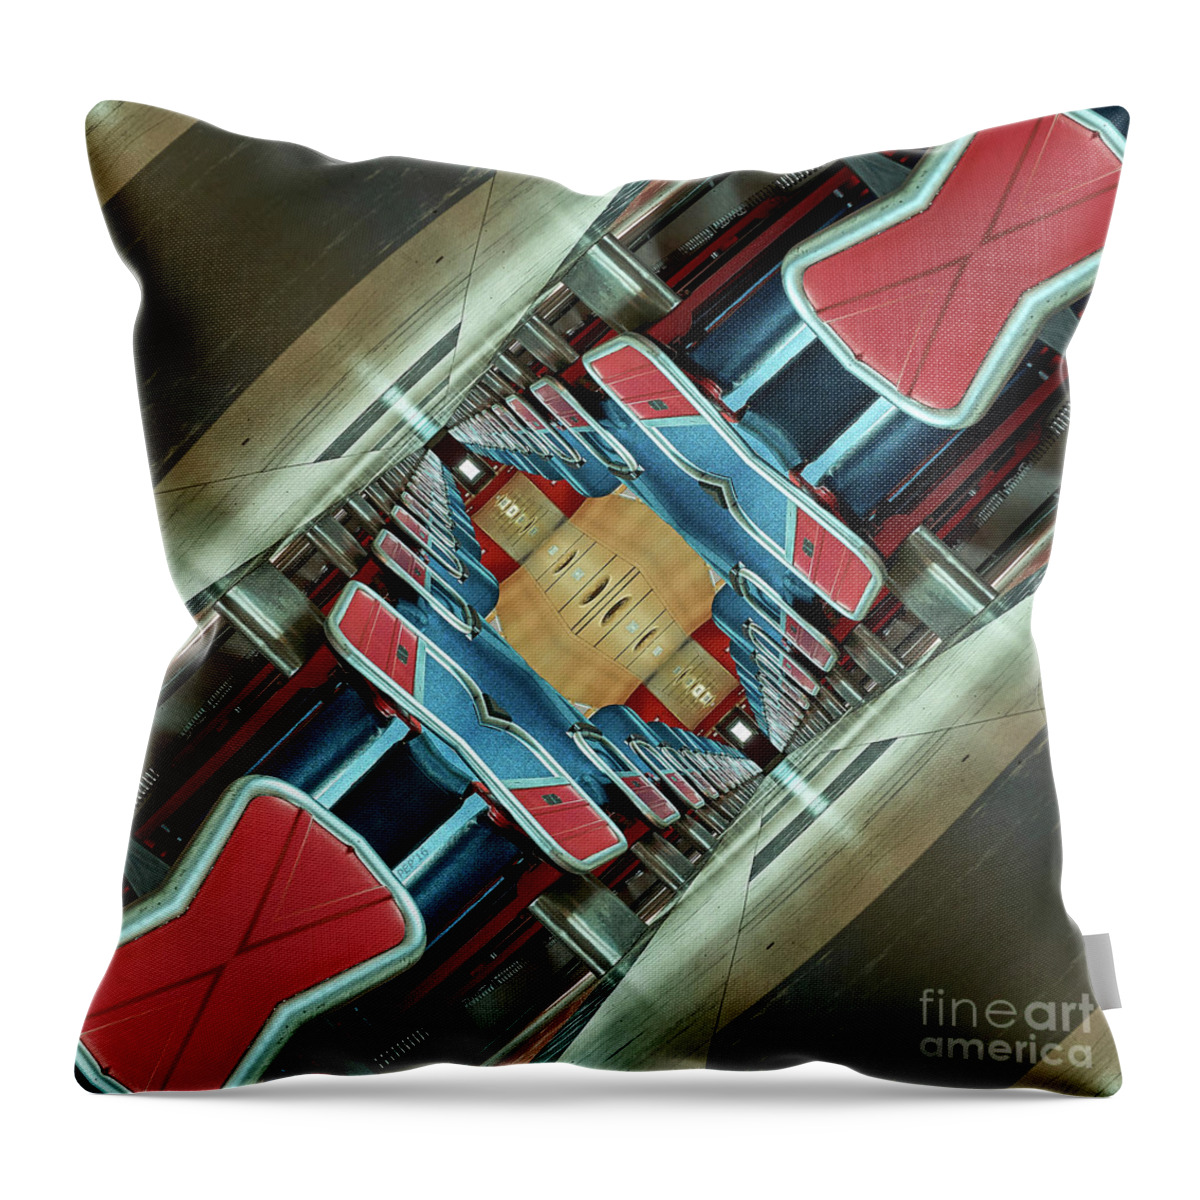 Train Throw Pillow featuring the photograph Upside Down Train by Phil Perkins